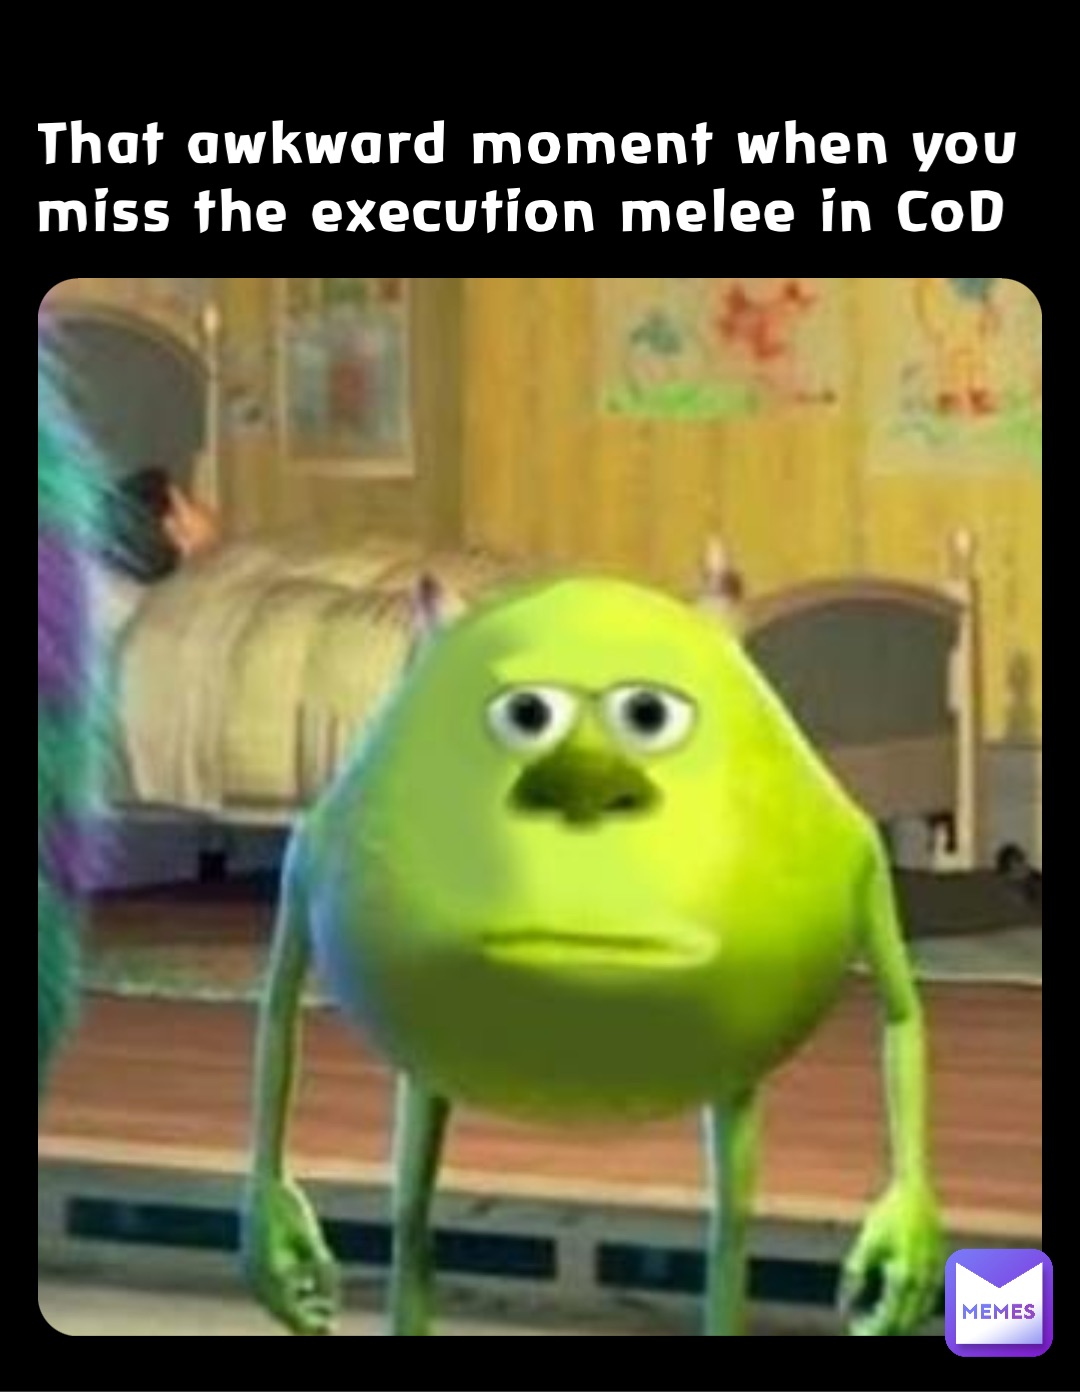 That awkward moment when you miss the execution melee in CoD